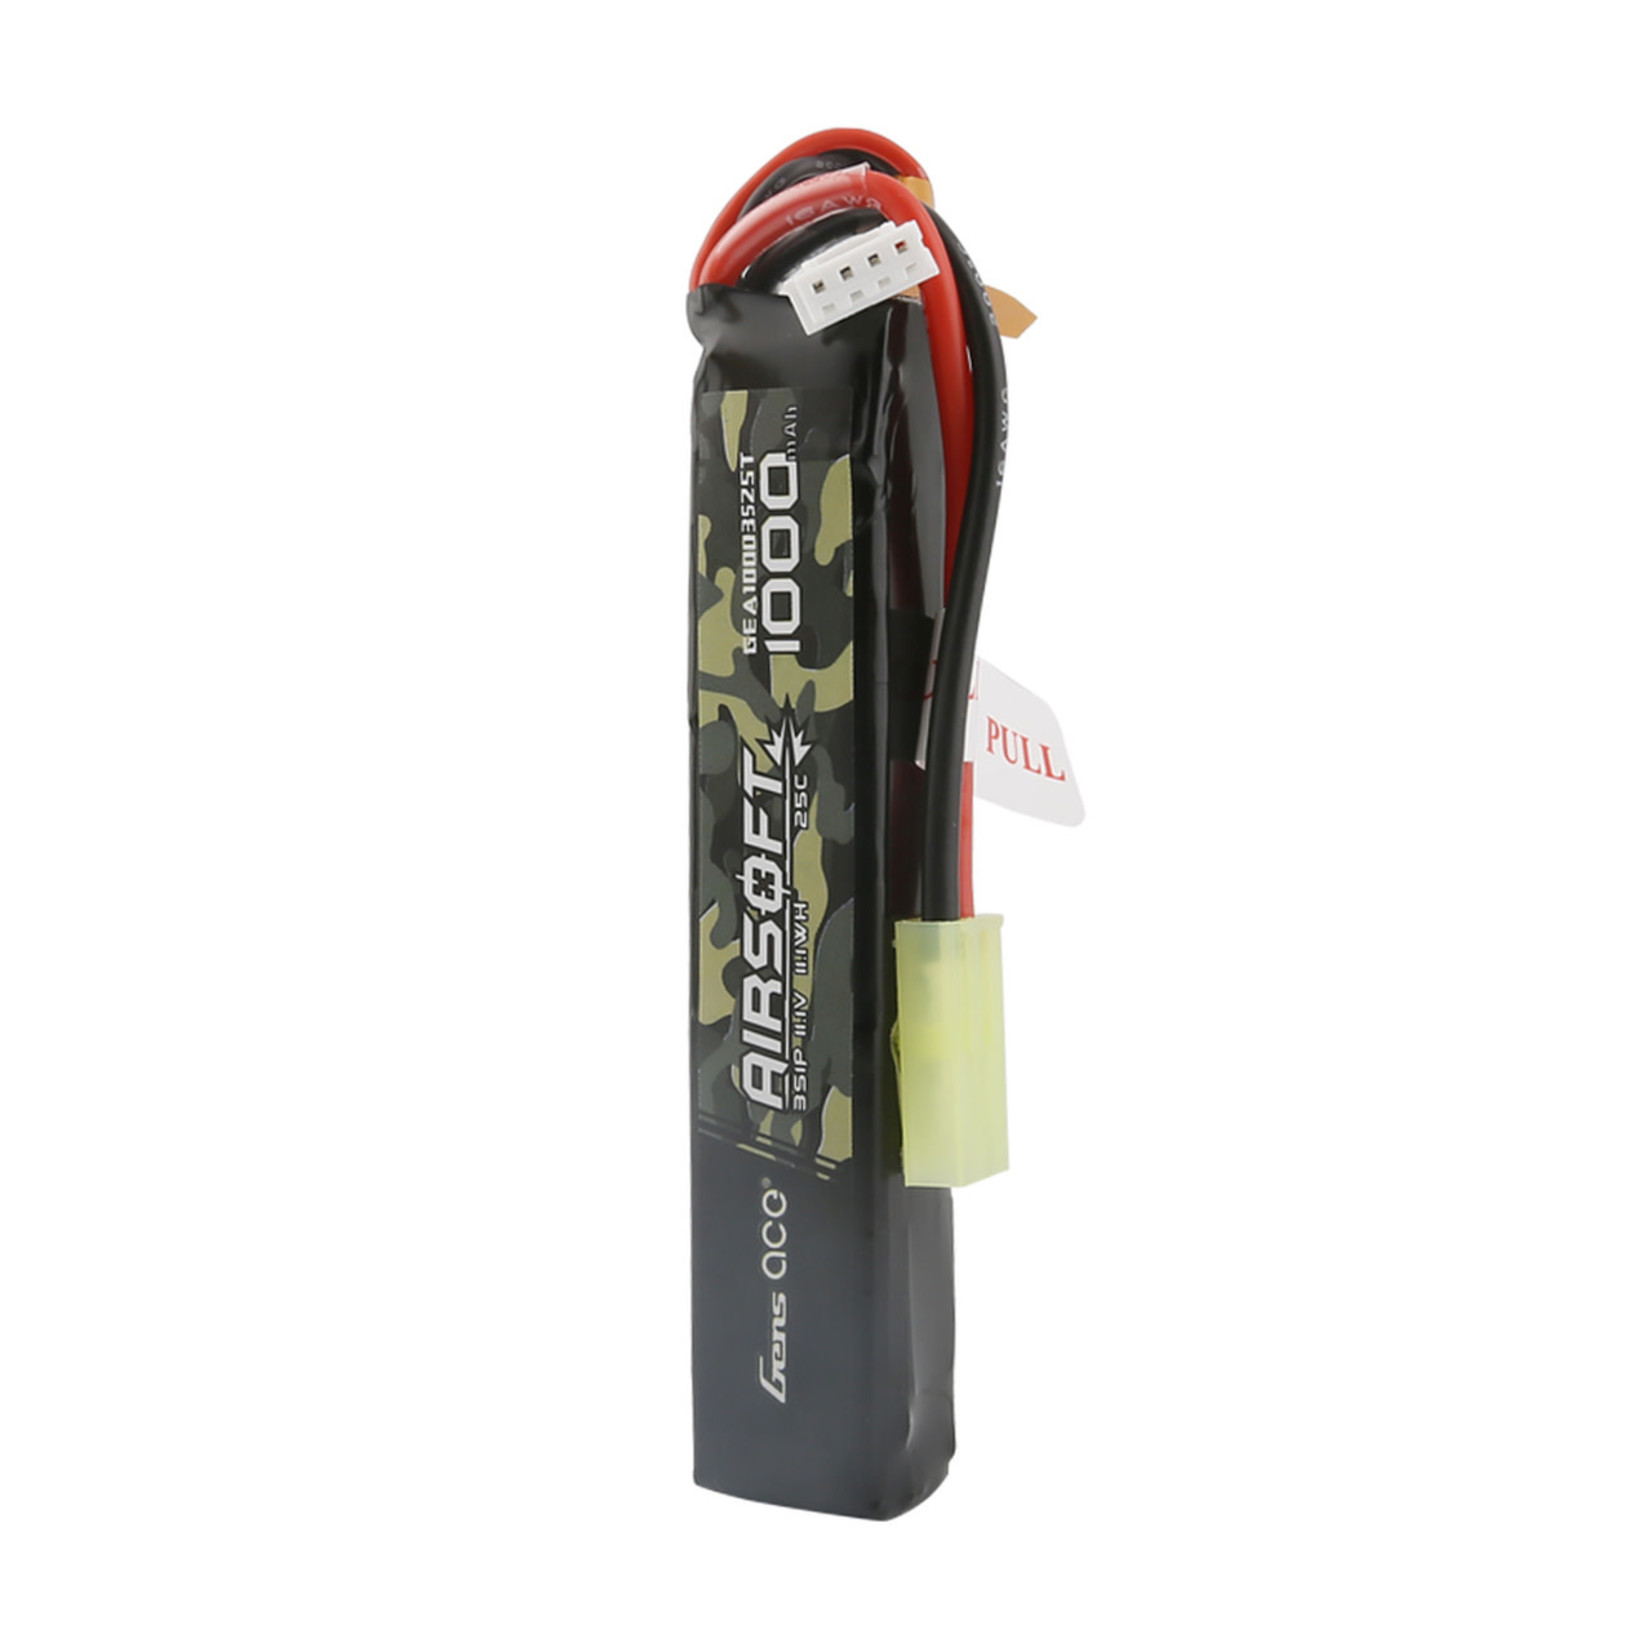 Gens Ace Gens Ace 25C 1000mAh 3S1P 11.1V Airsoft Battery w/Tamiya Plug #GEA10003S25T